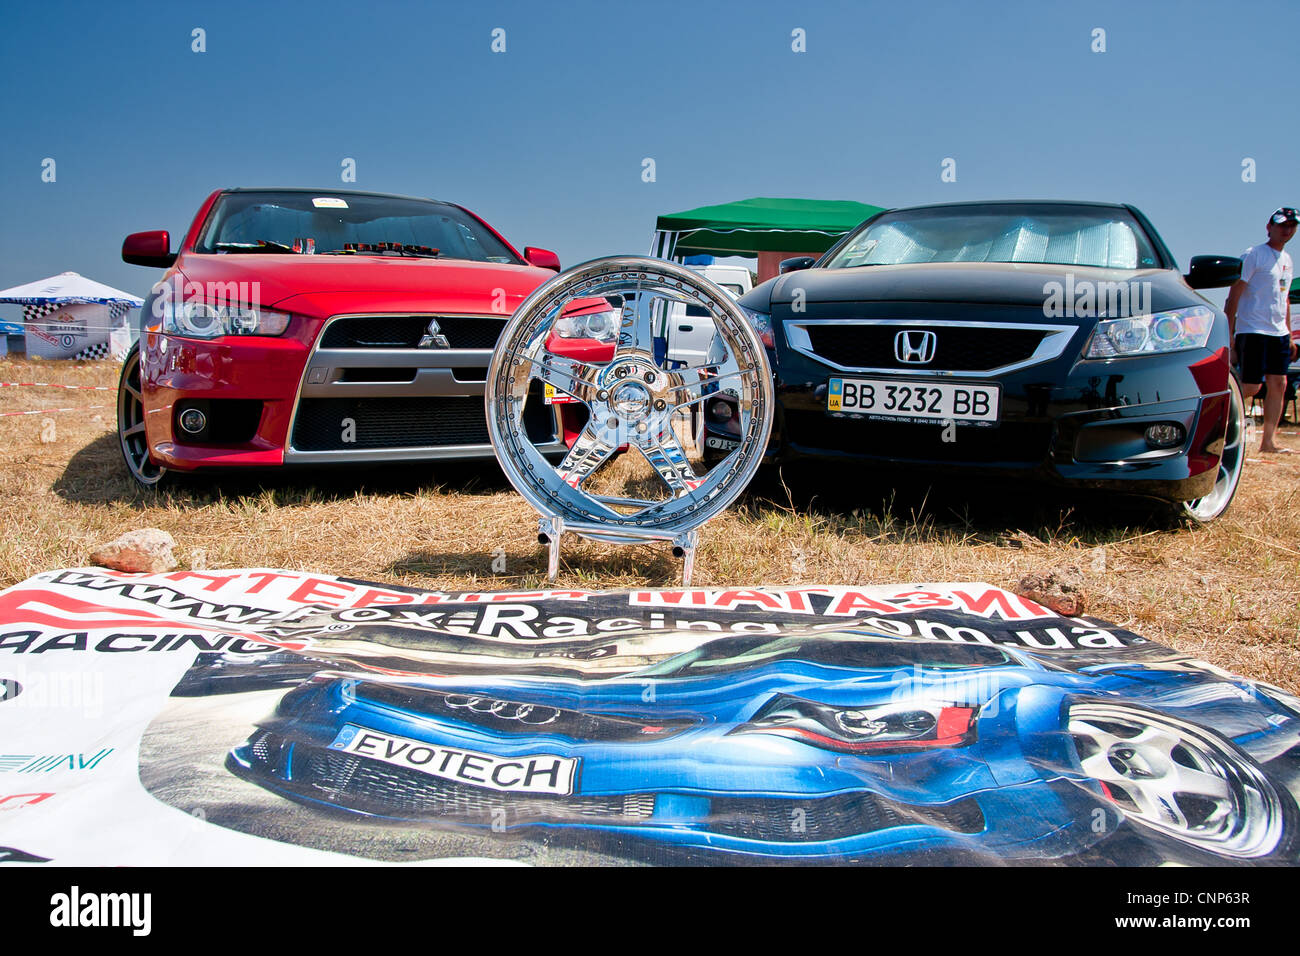 Racing Cars in show place Foto Stock